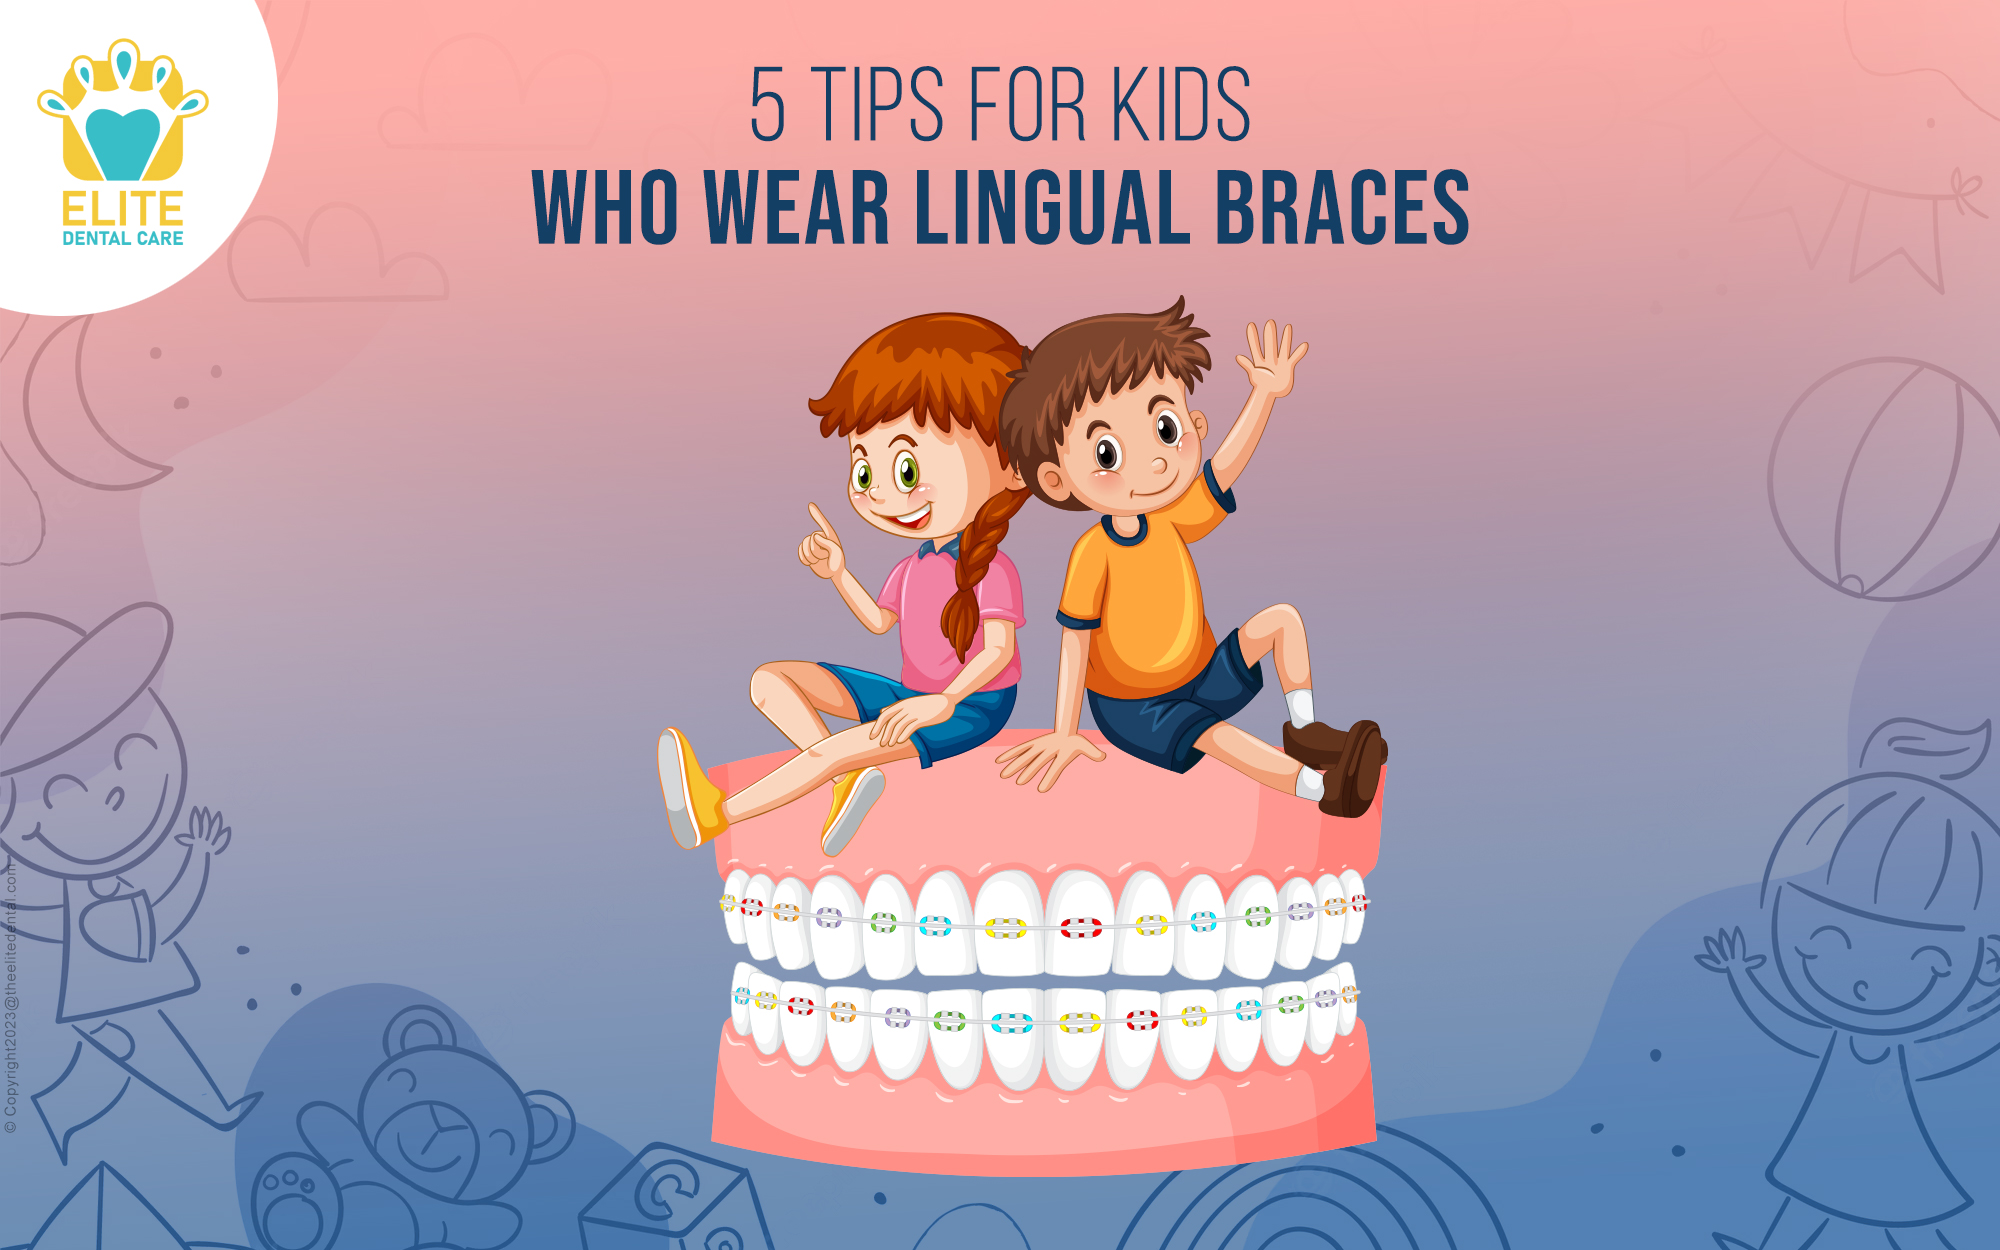 5 tips for kids who wear lingual braces